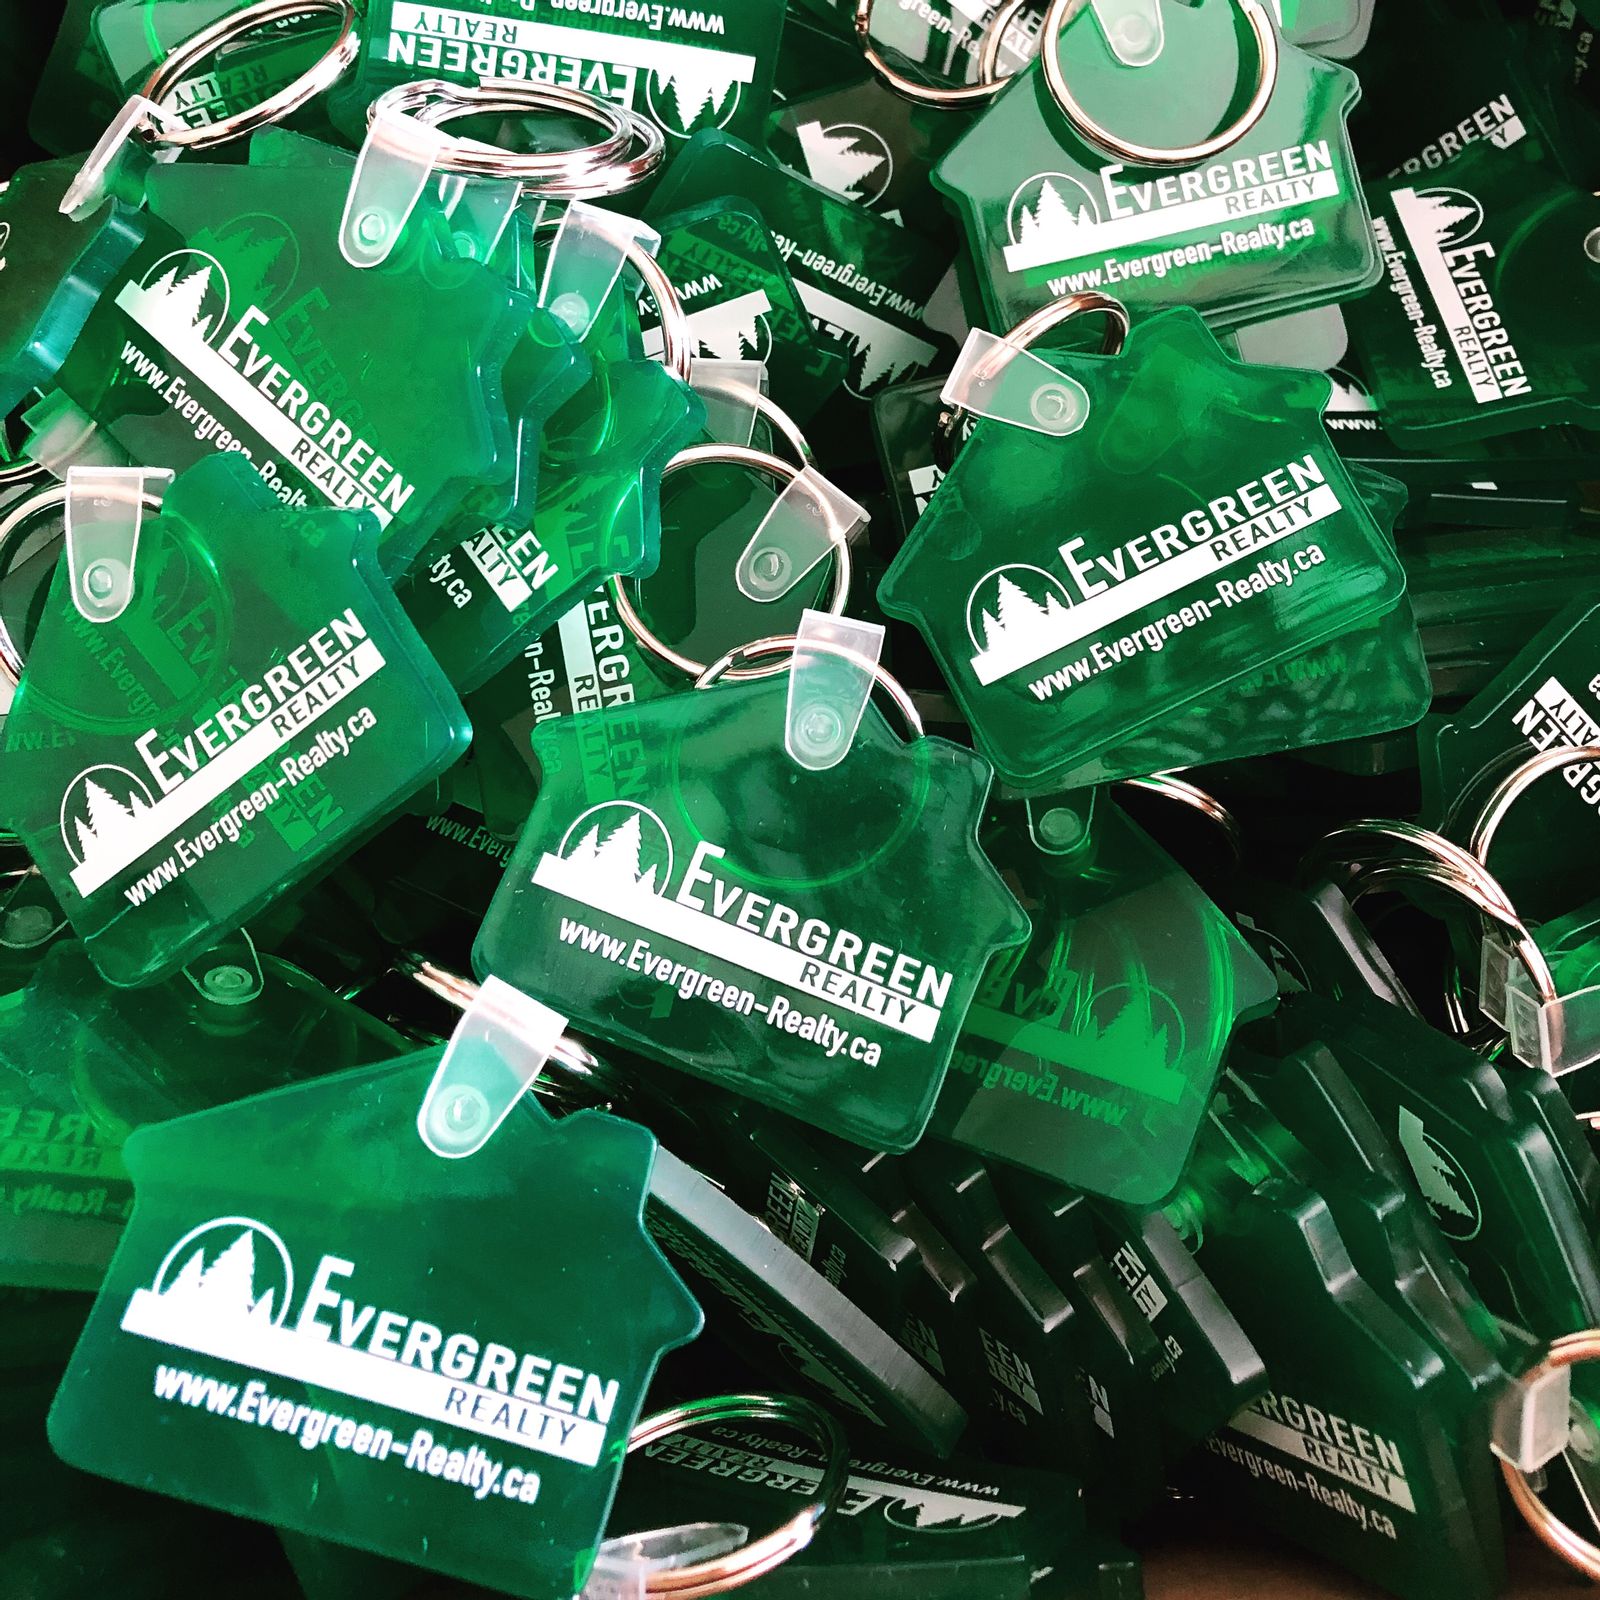 New keychains @ Evergreen Realty!